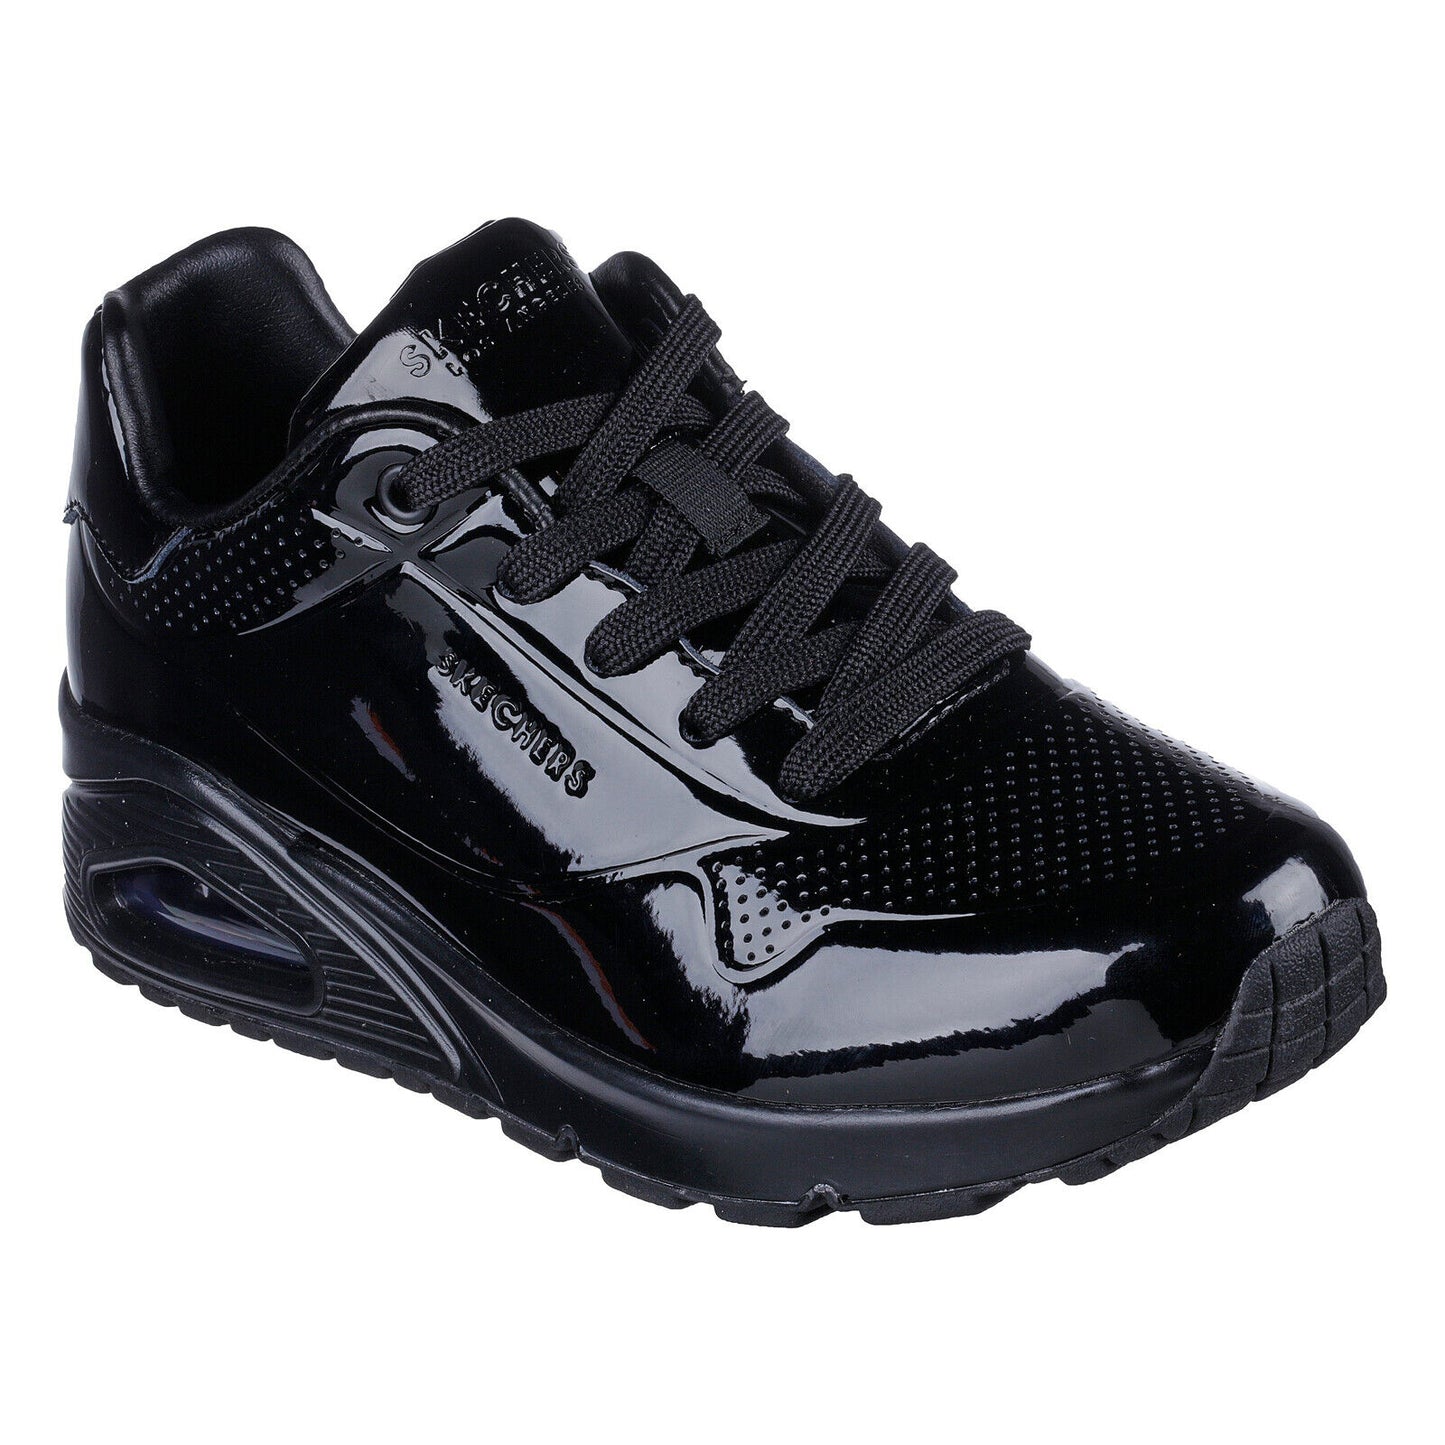 Skechers Ladies Uno Shiny One Black Patent Leather Trainers Shoes